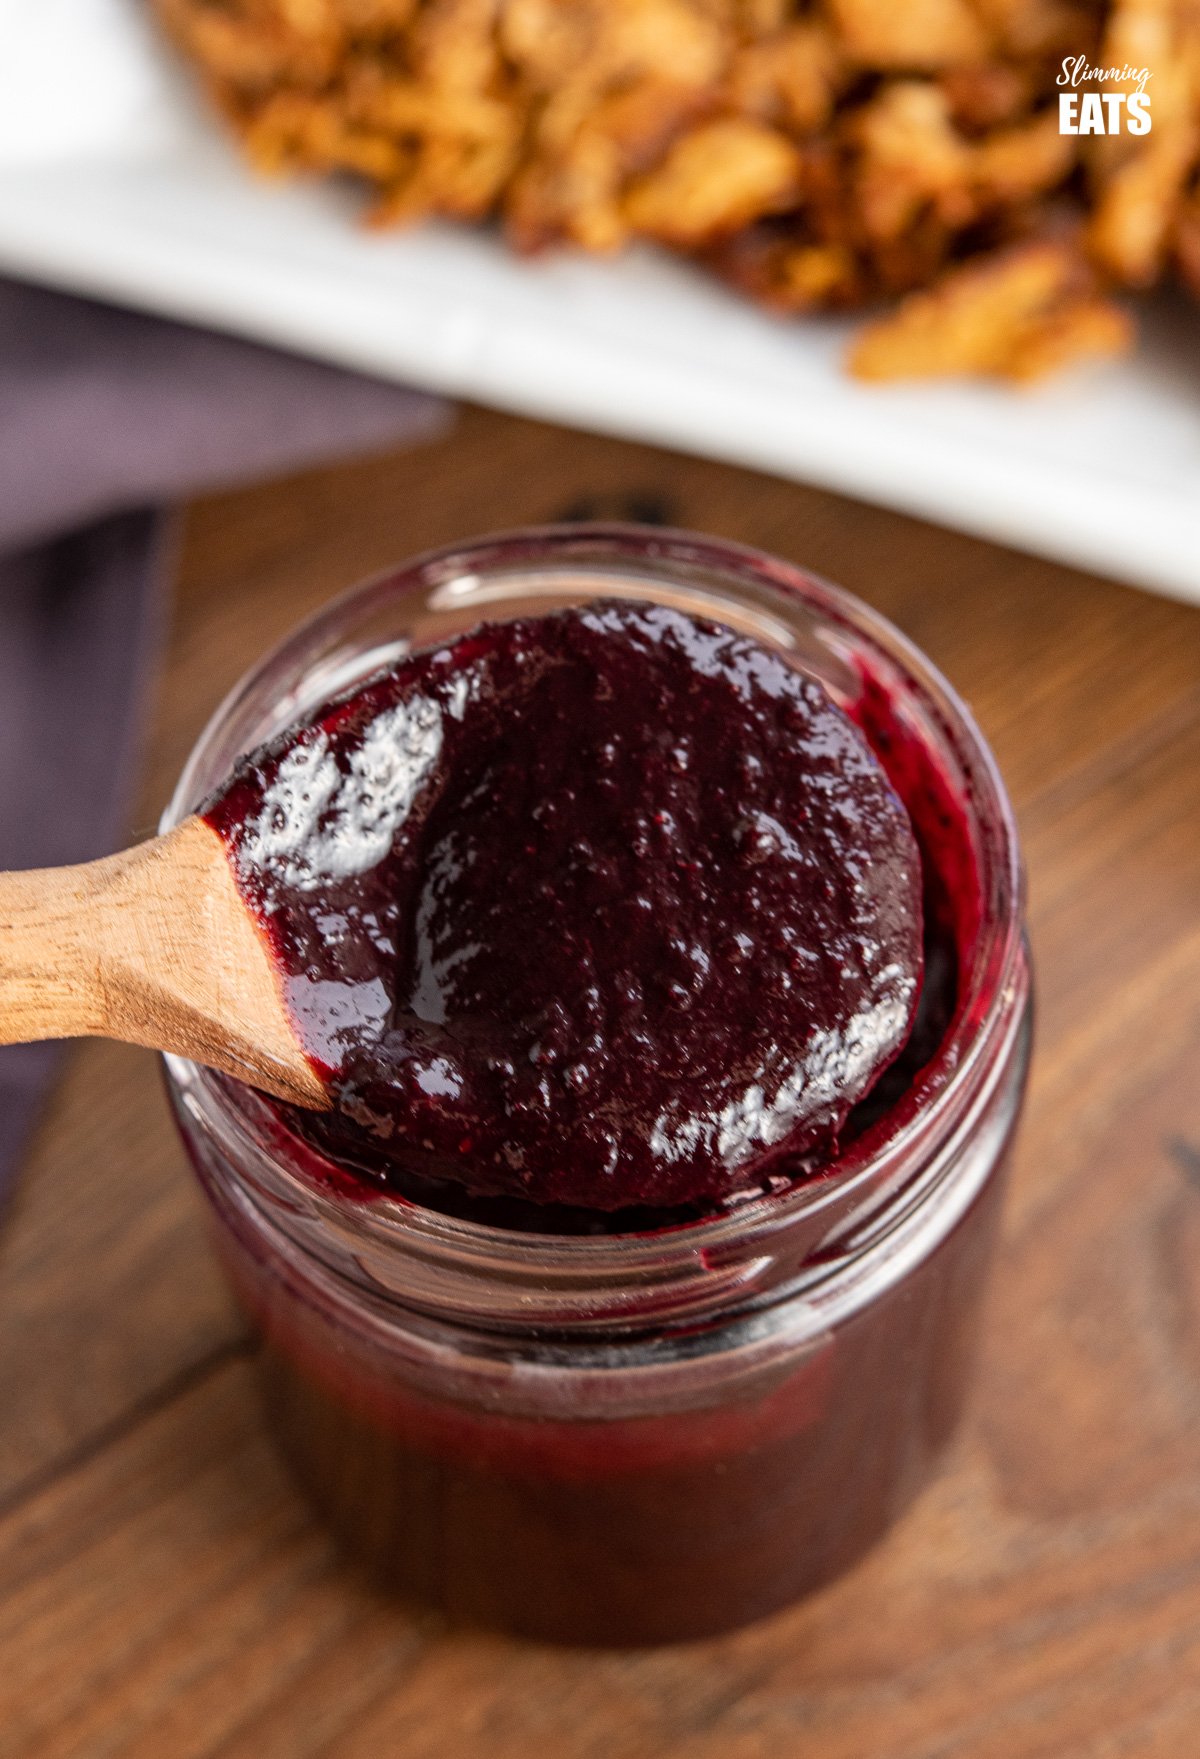 wooden spoon spooning up blueberry bbq sauce from jar